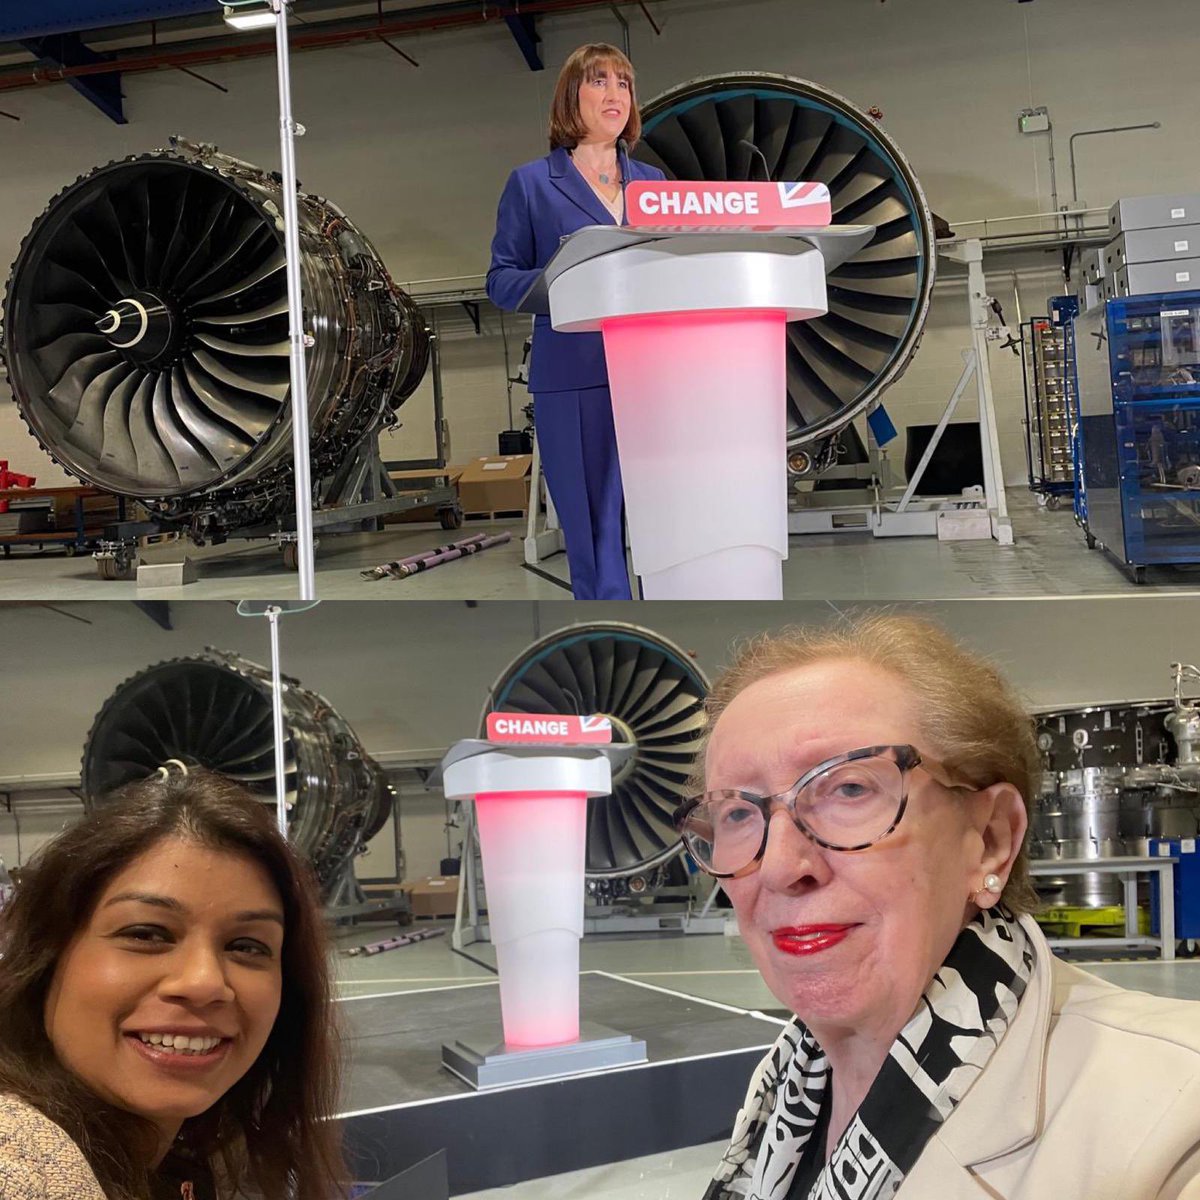 I was at Rolls-Royce in Derby today to hear @RachelReevesMP speak. Rachel would be the UK's first female Chancellor, and we were joined by our first female Foreign Secretary, Margaret Beckett, and the next generation of @UKLabour women, with PPCs @SamanthaNiblet4 & @catkinson80.